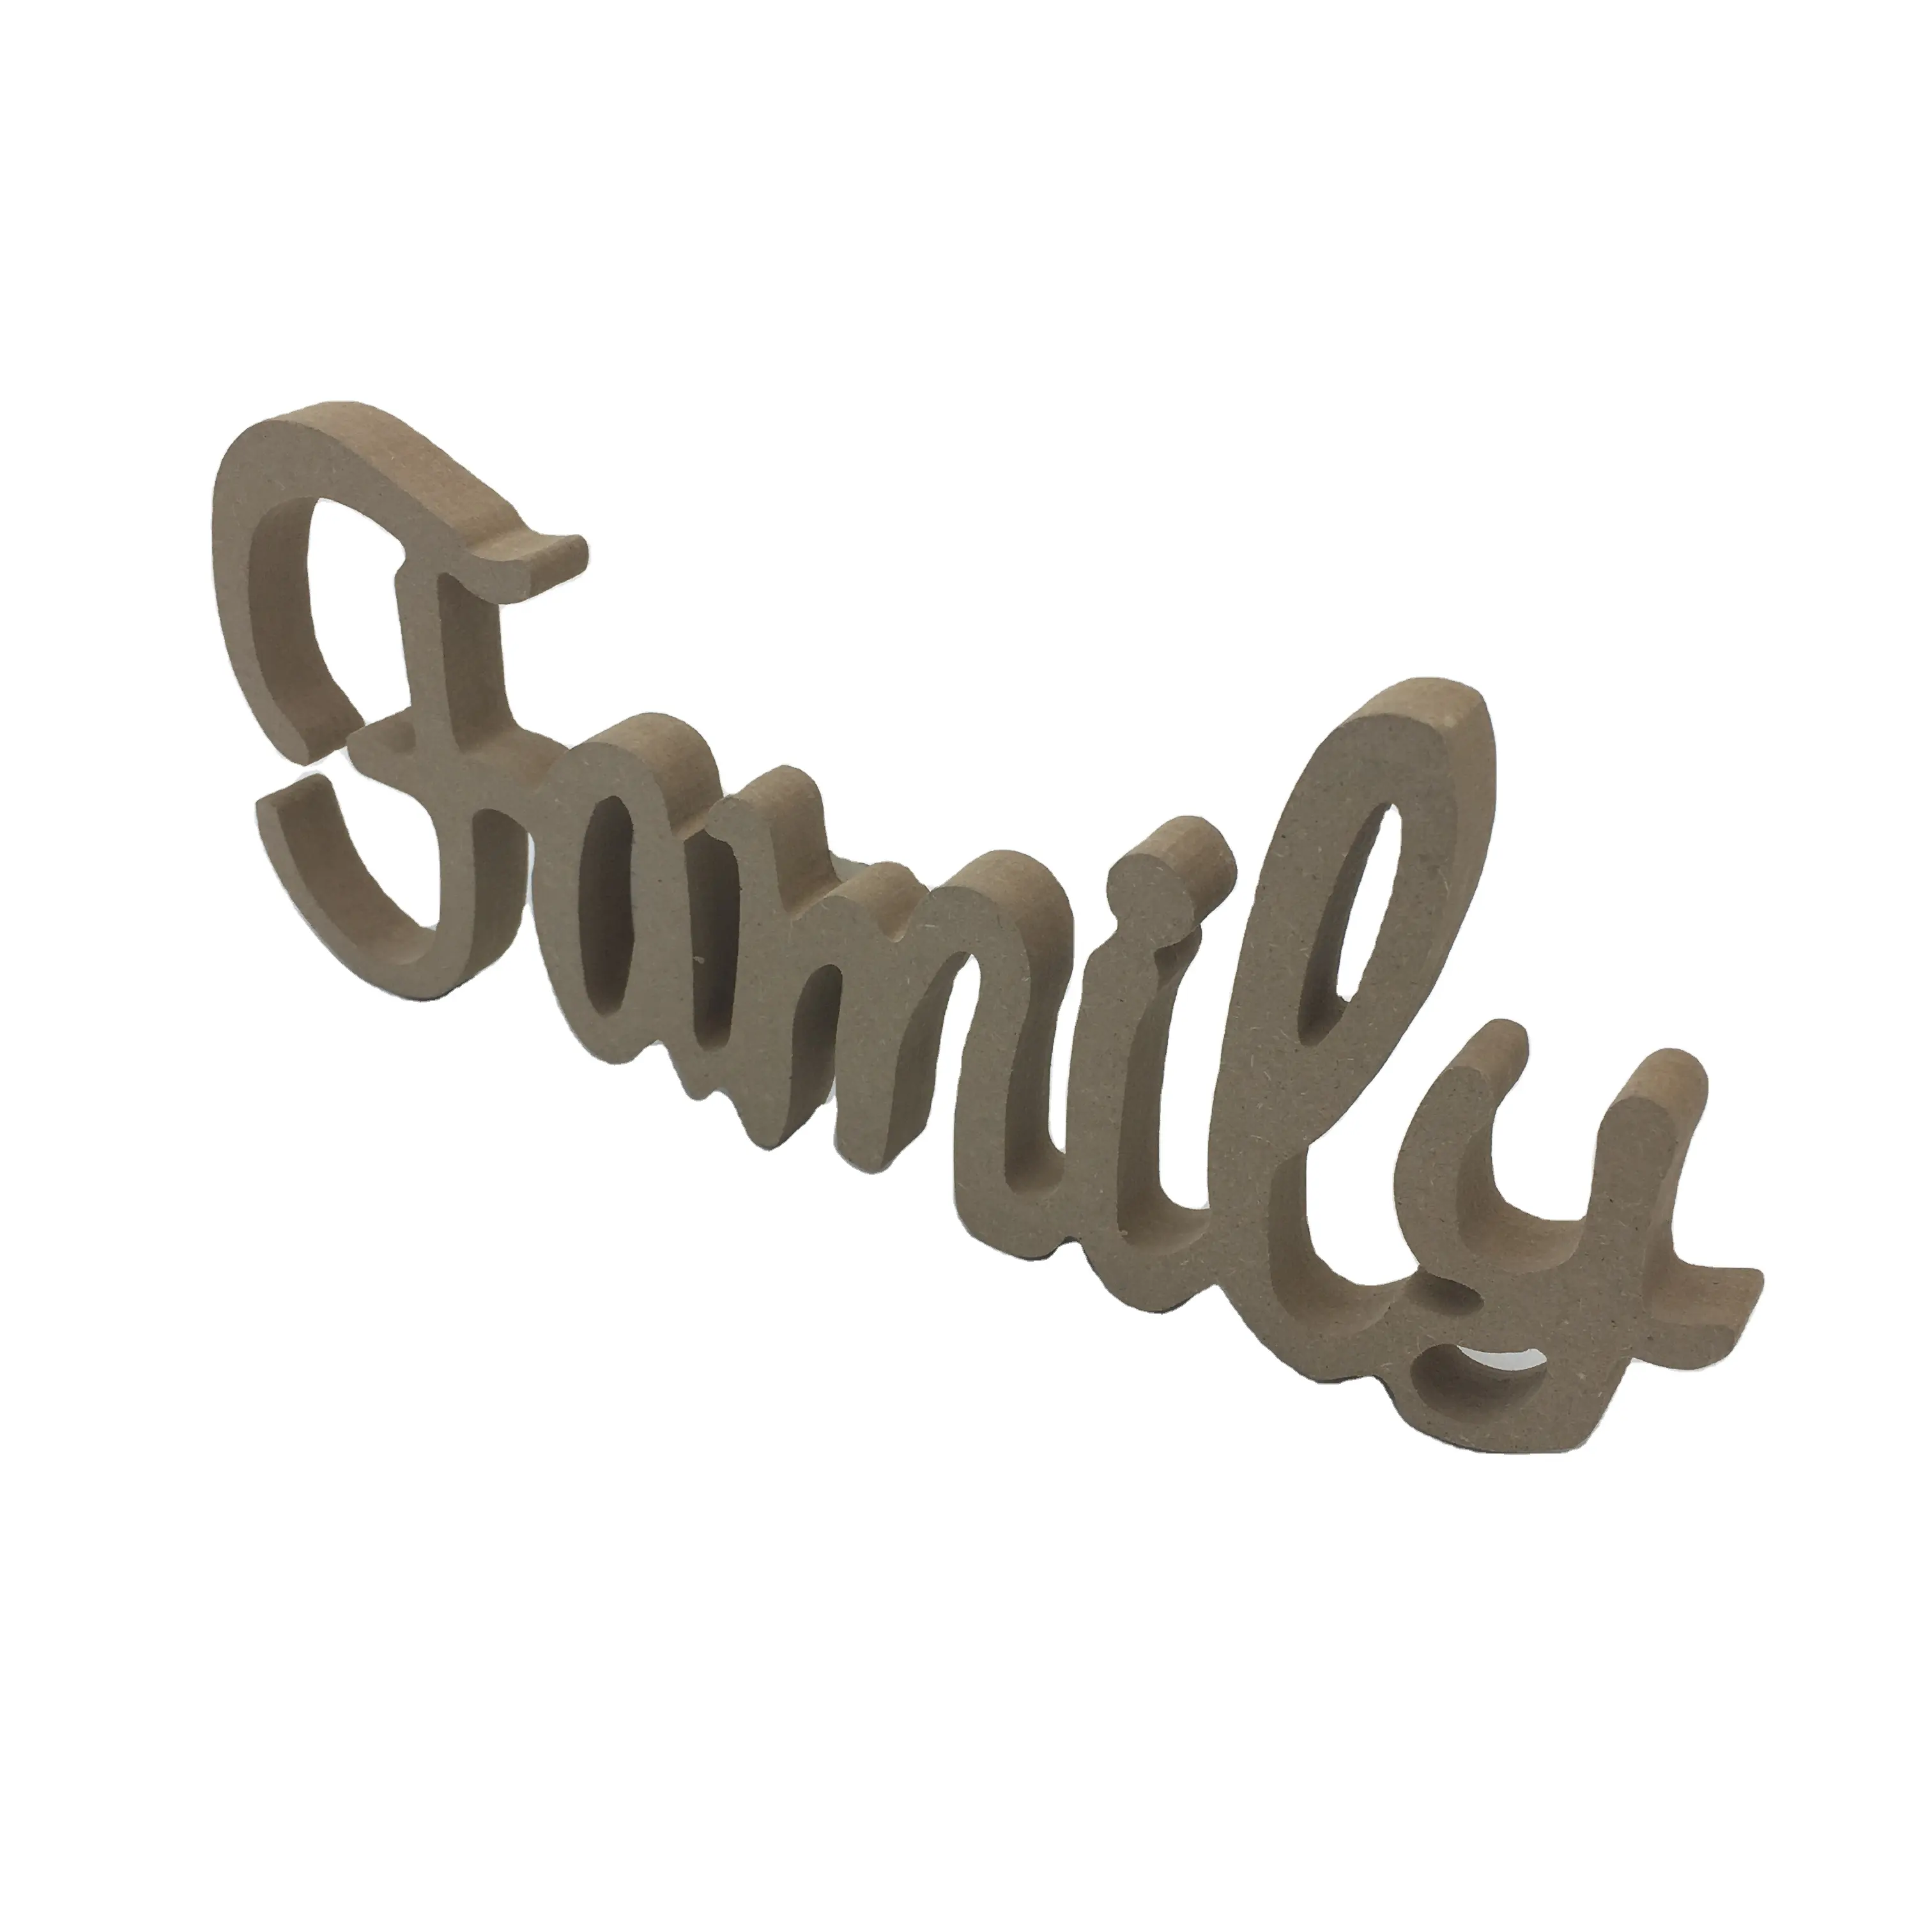 Wooden craft MDF 'Family' word decoration